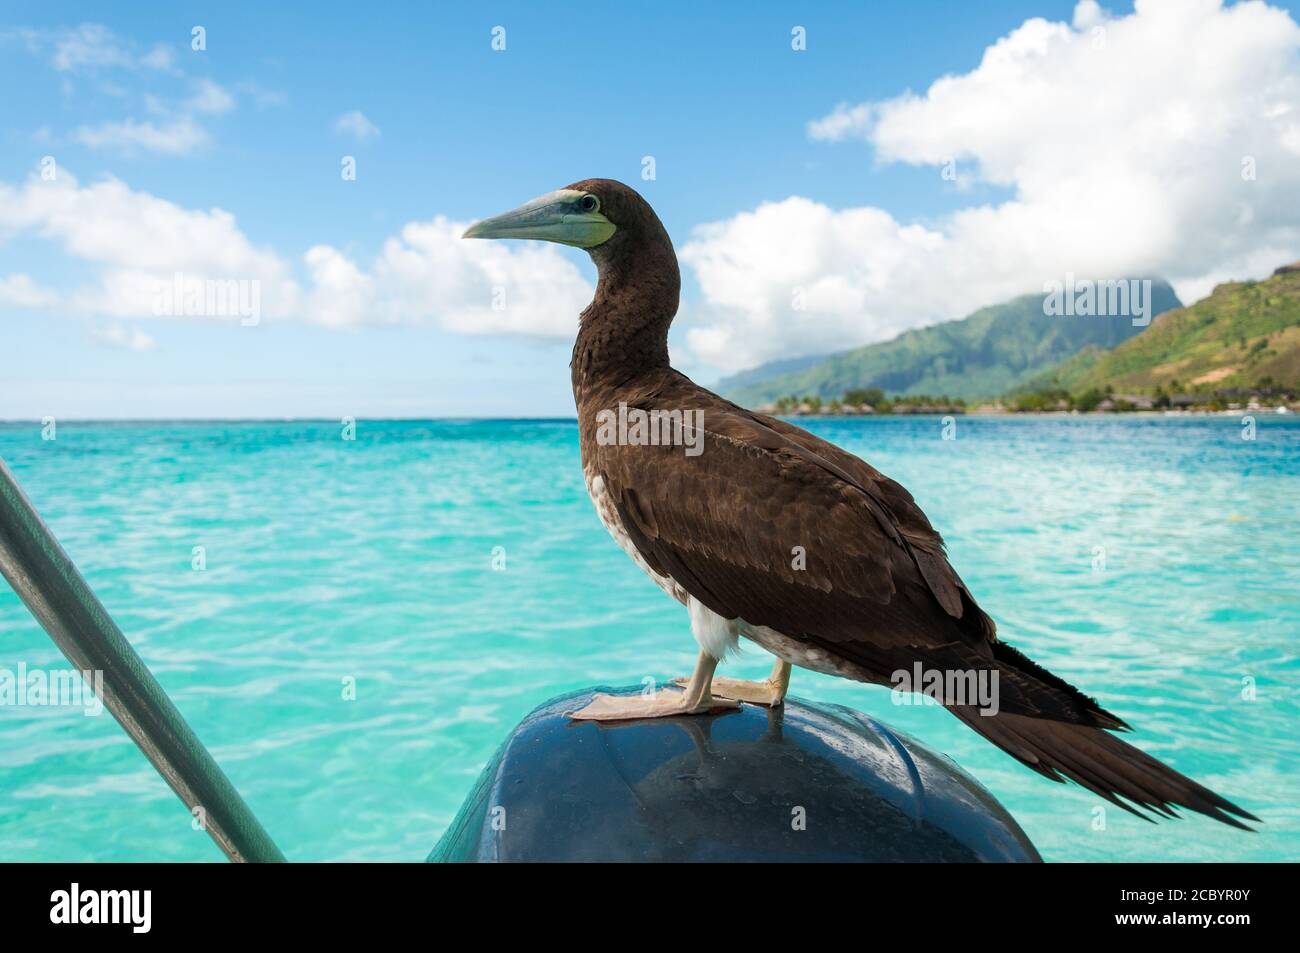 Large black bird resting on the motor of a boat. Stock Photo